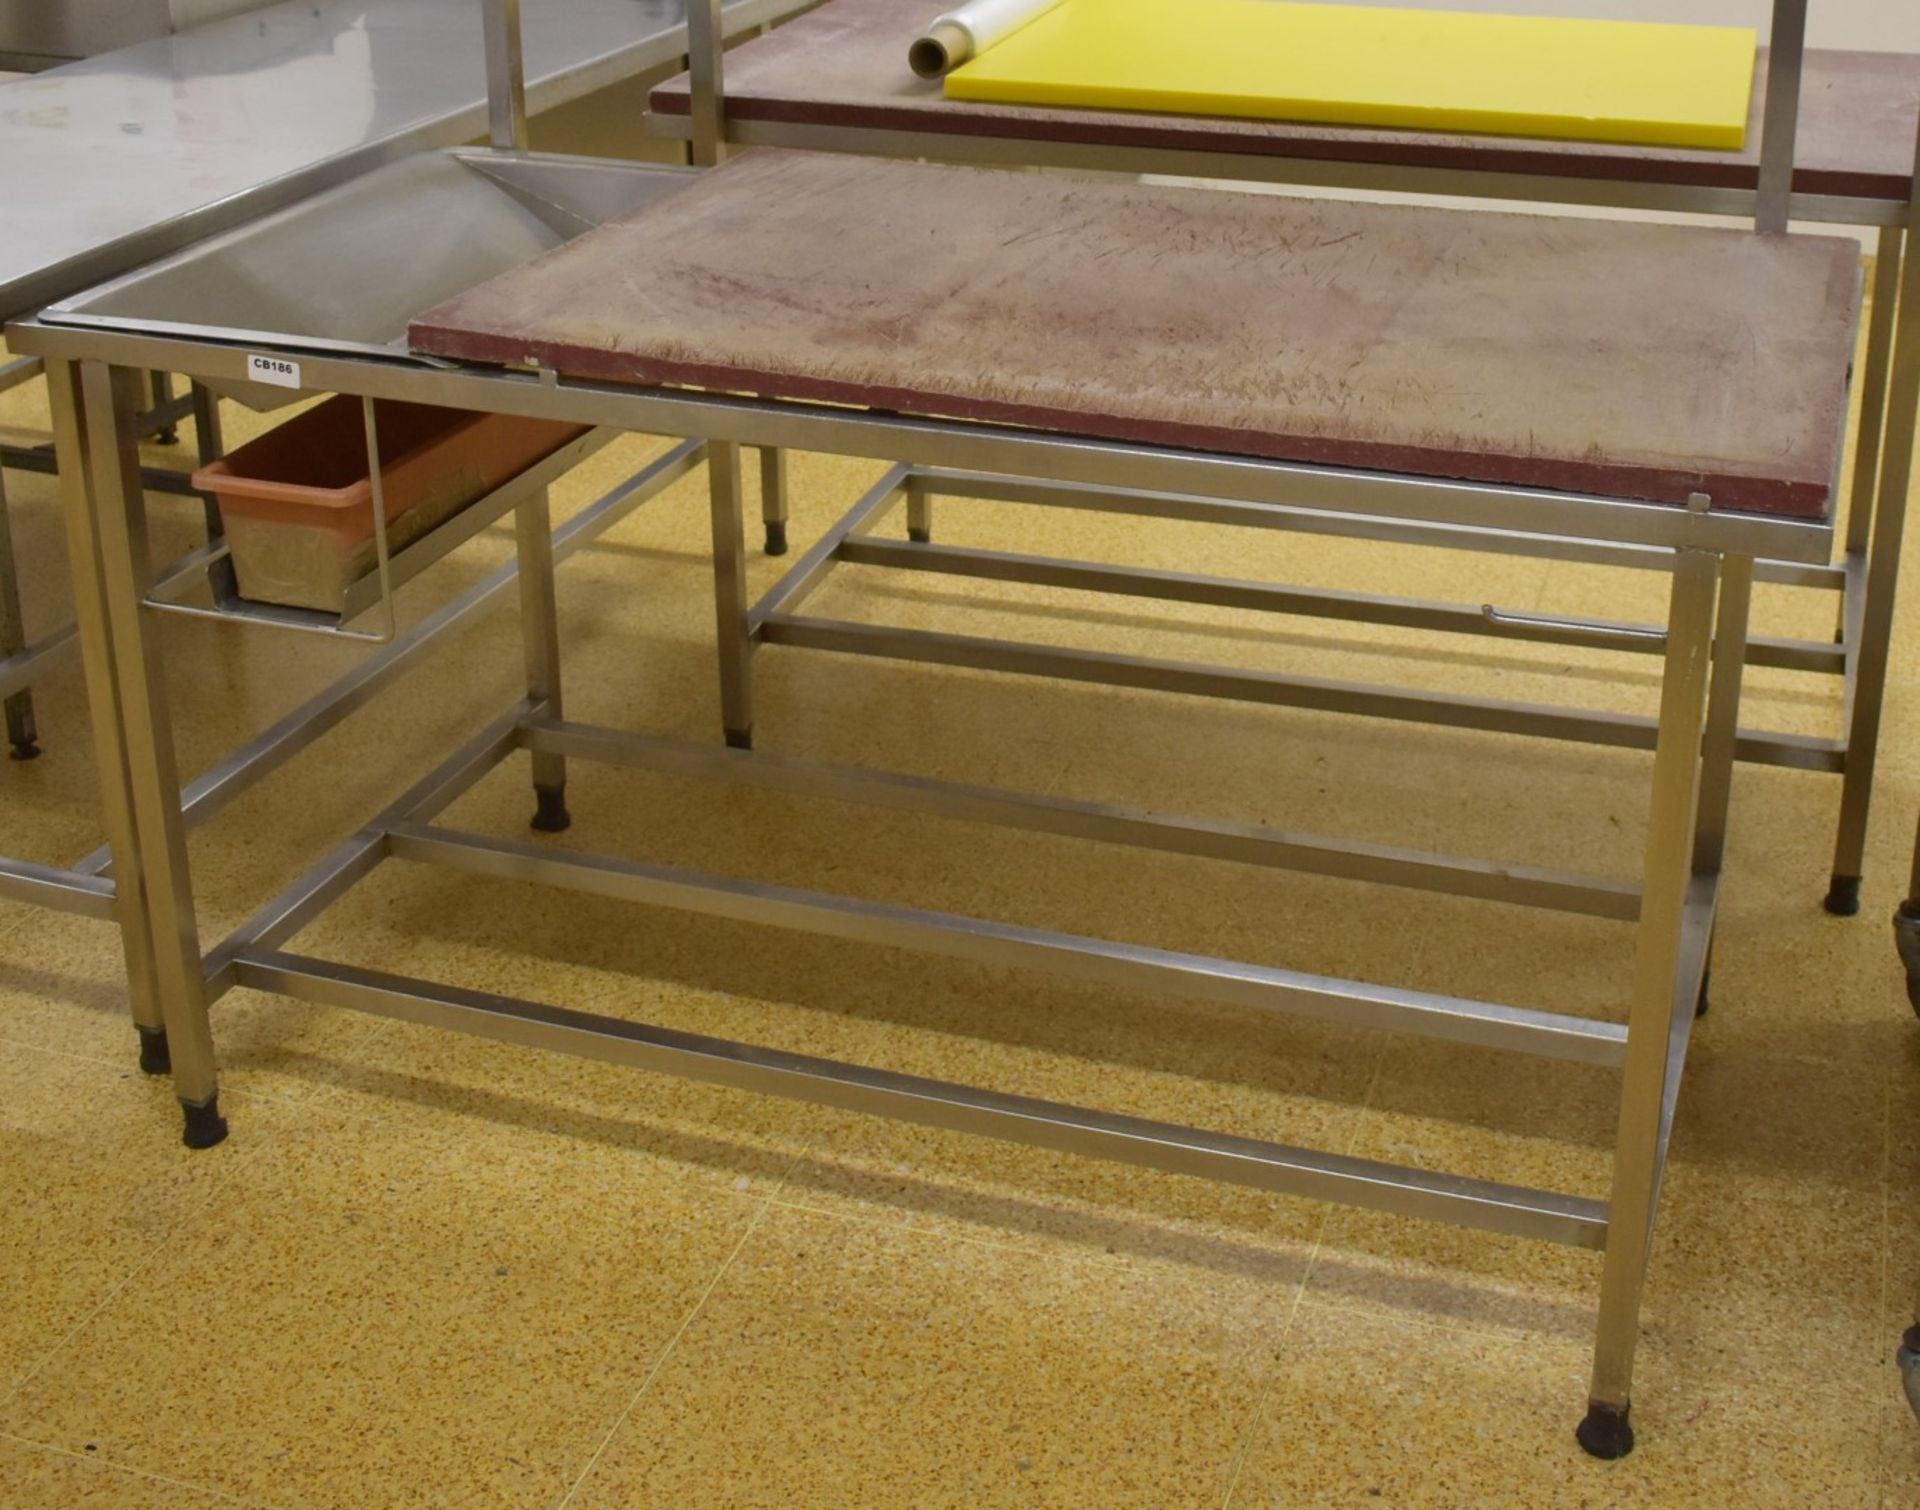 1 x Commercial Supermarket Butchers Prep Table - Stainless Steel Bench With Chopping Board, Drip - Image 2 of 6